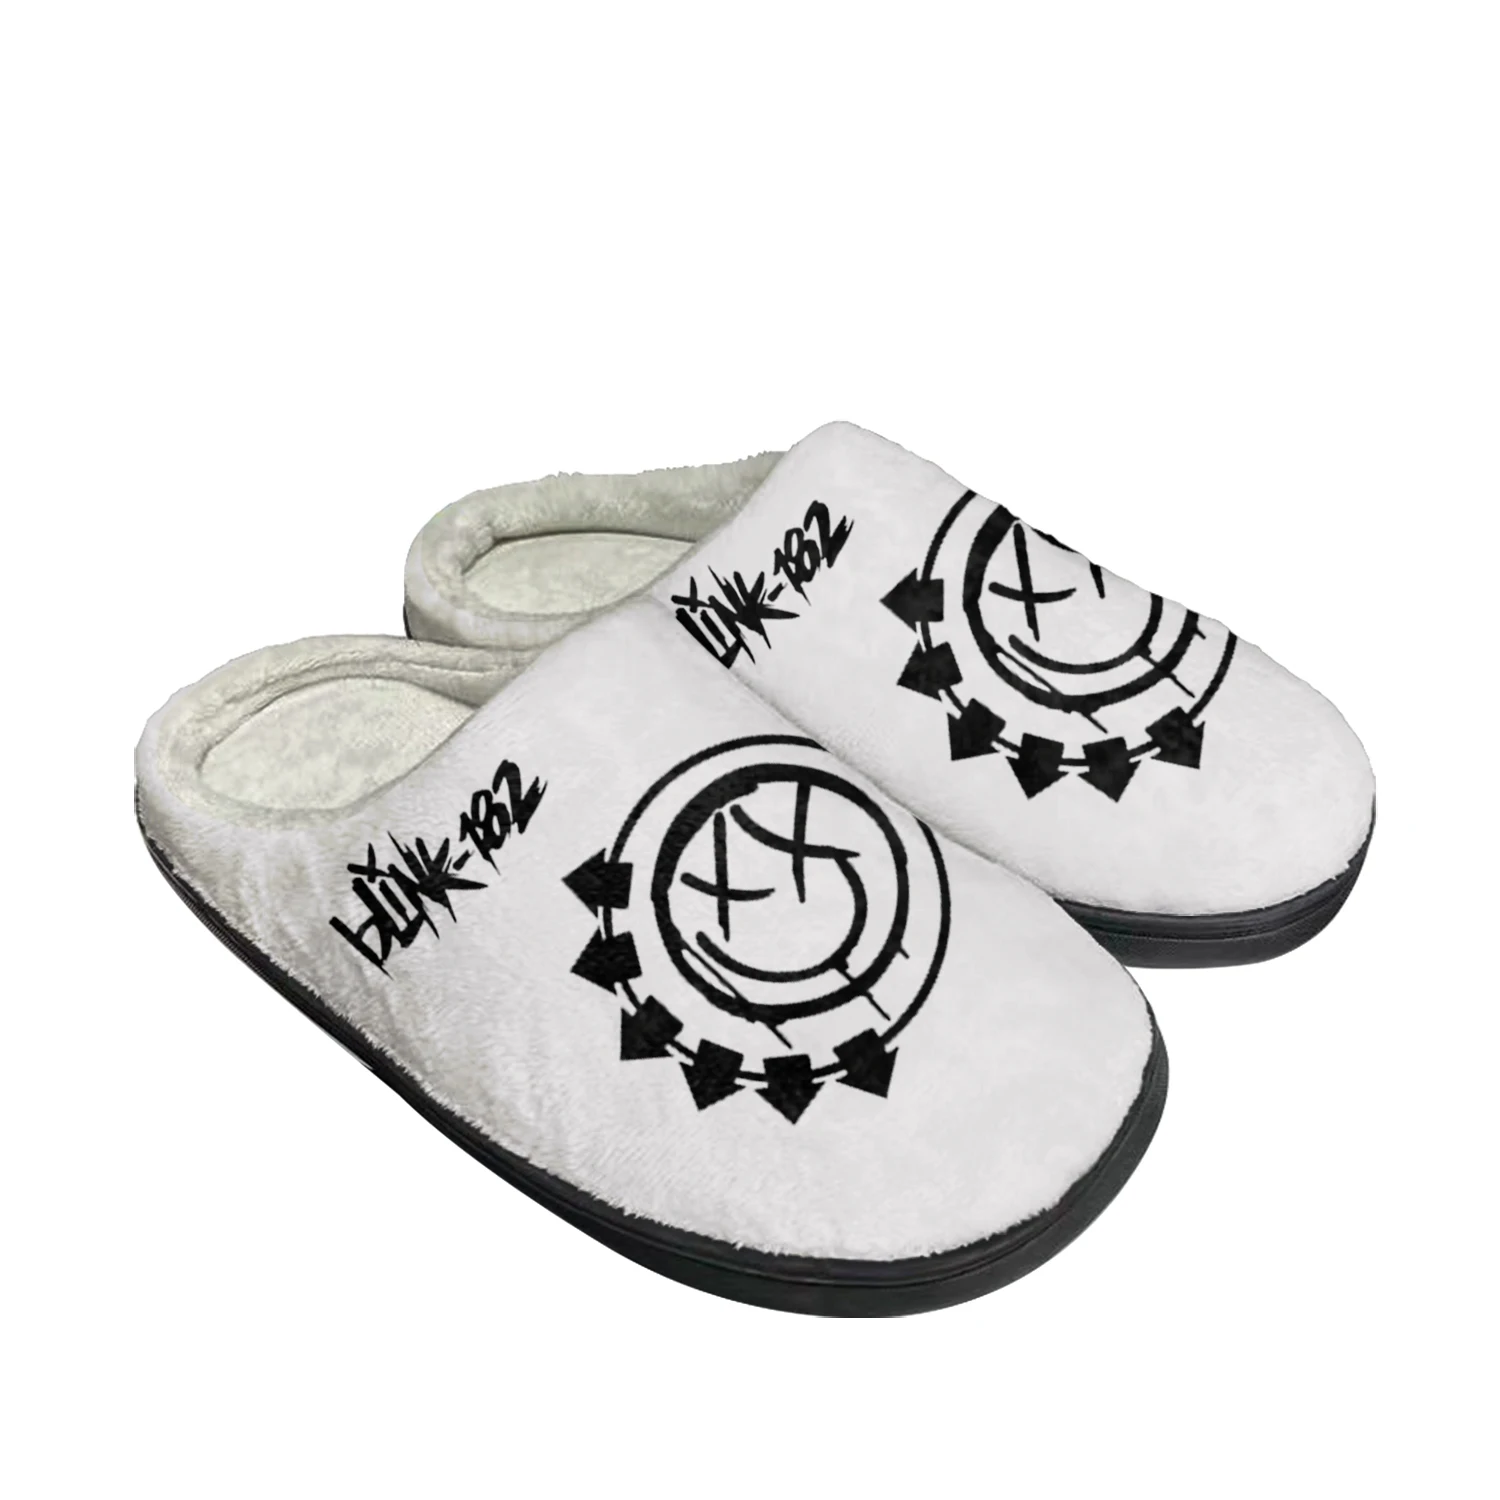 

Blink-182 Popularity Punk Rock Band Home Cotton Custom Slippers Mens Womens Sandals Plush Bedroom Keep Warm Shoe Thermal Slipper